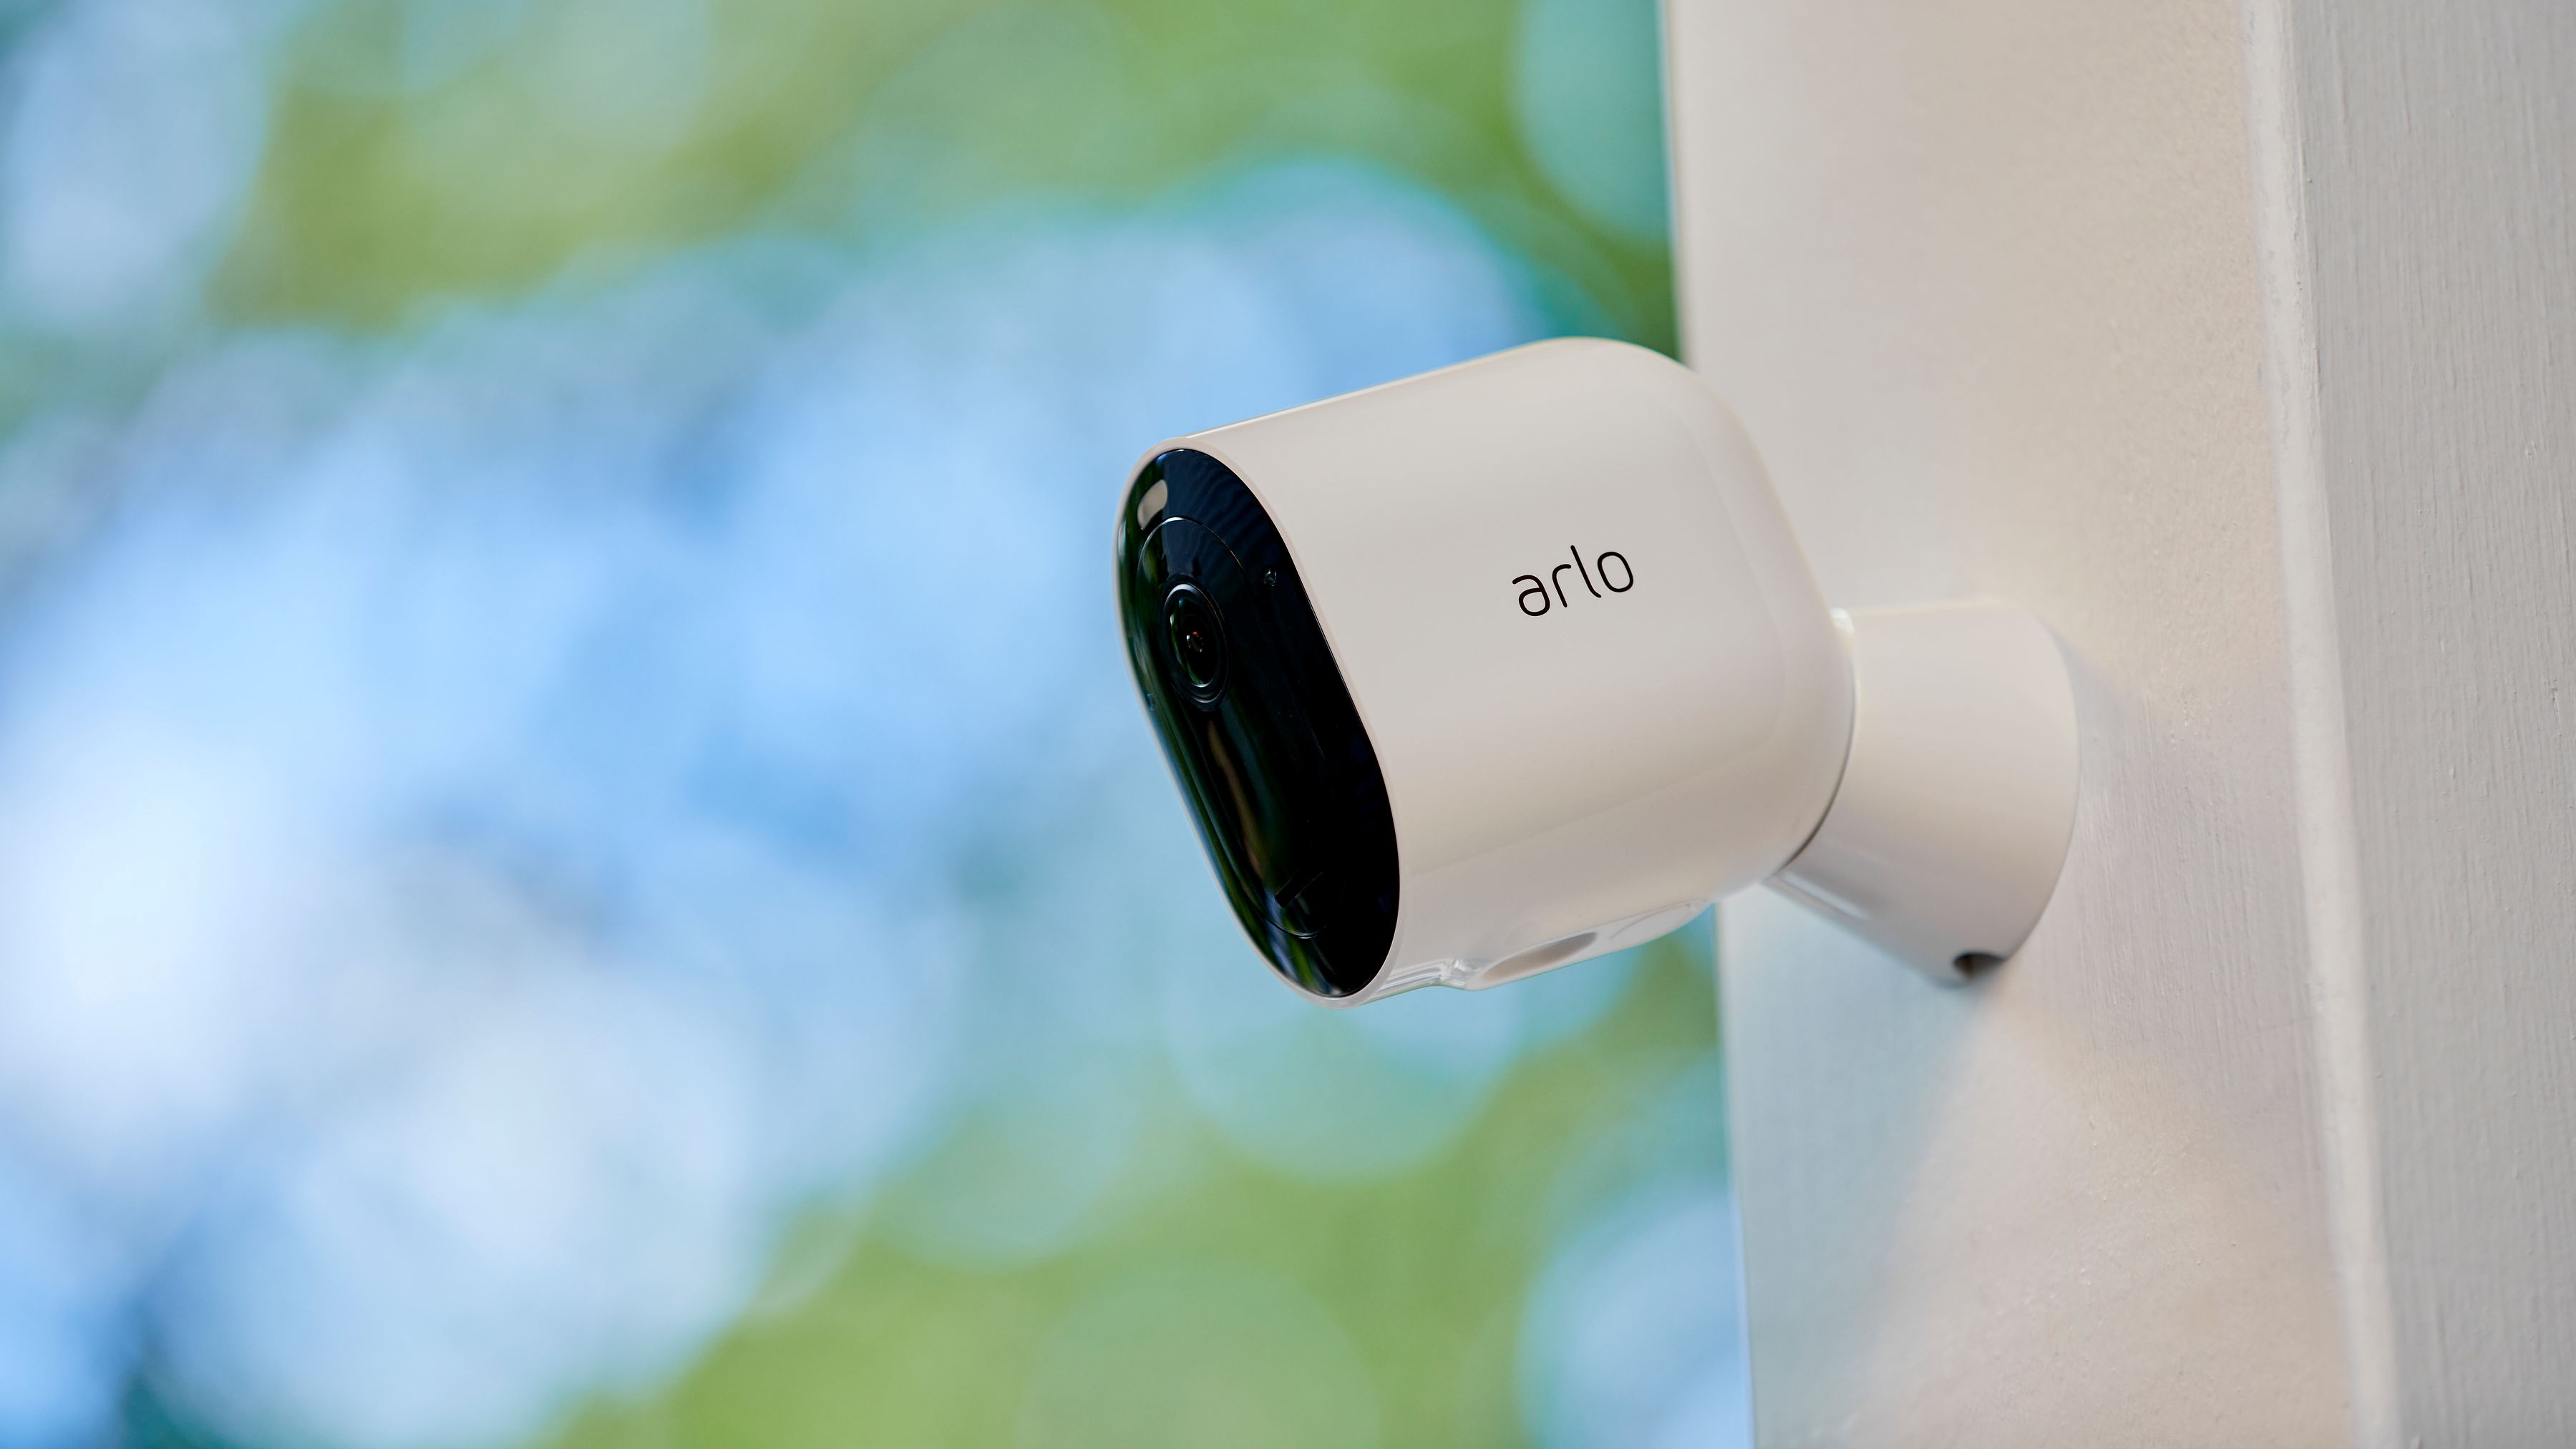 Arlo, your Home Security Surveillance Cameras Expert in Europe